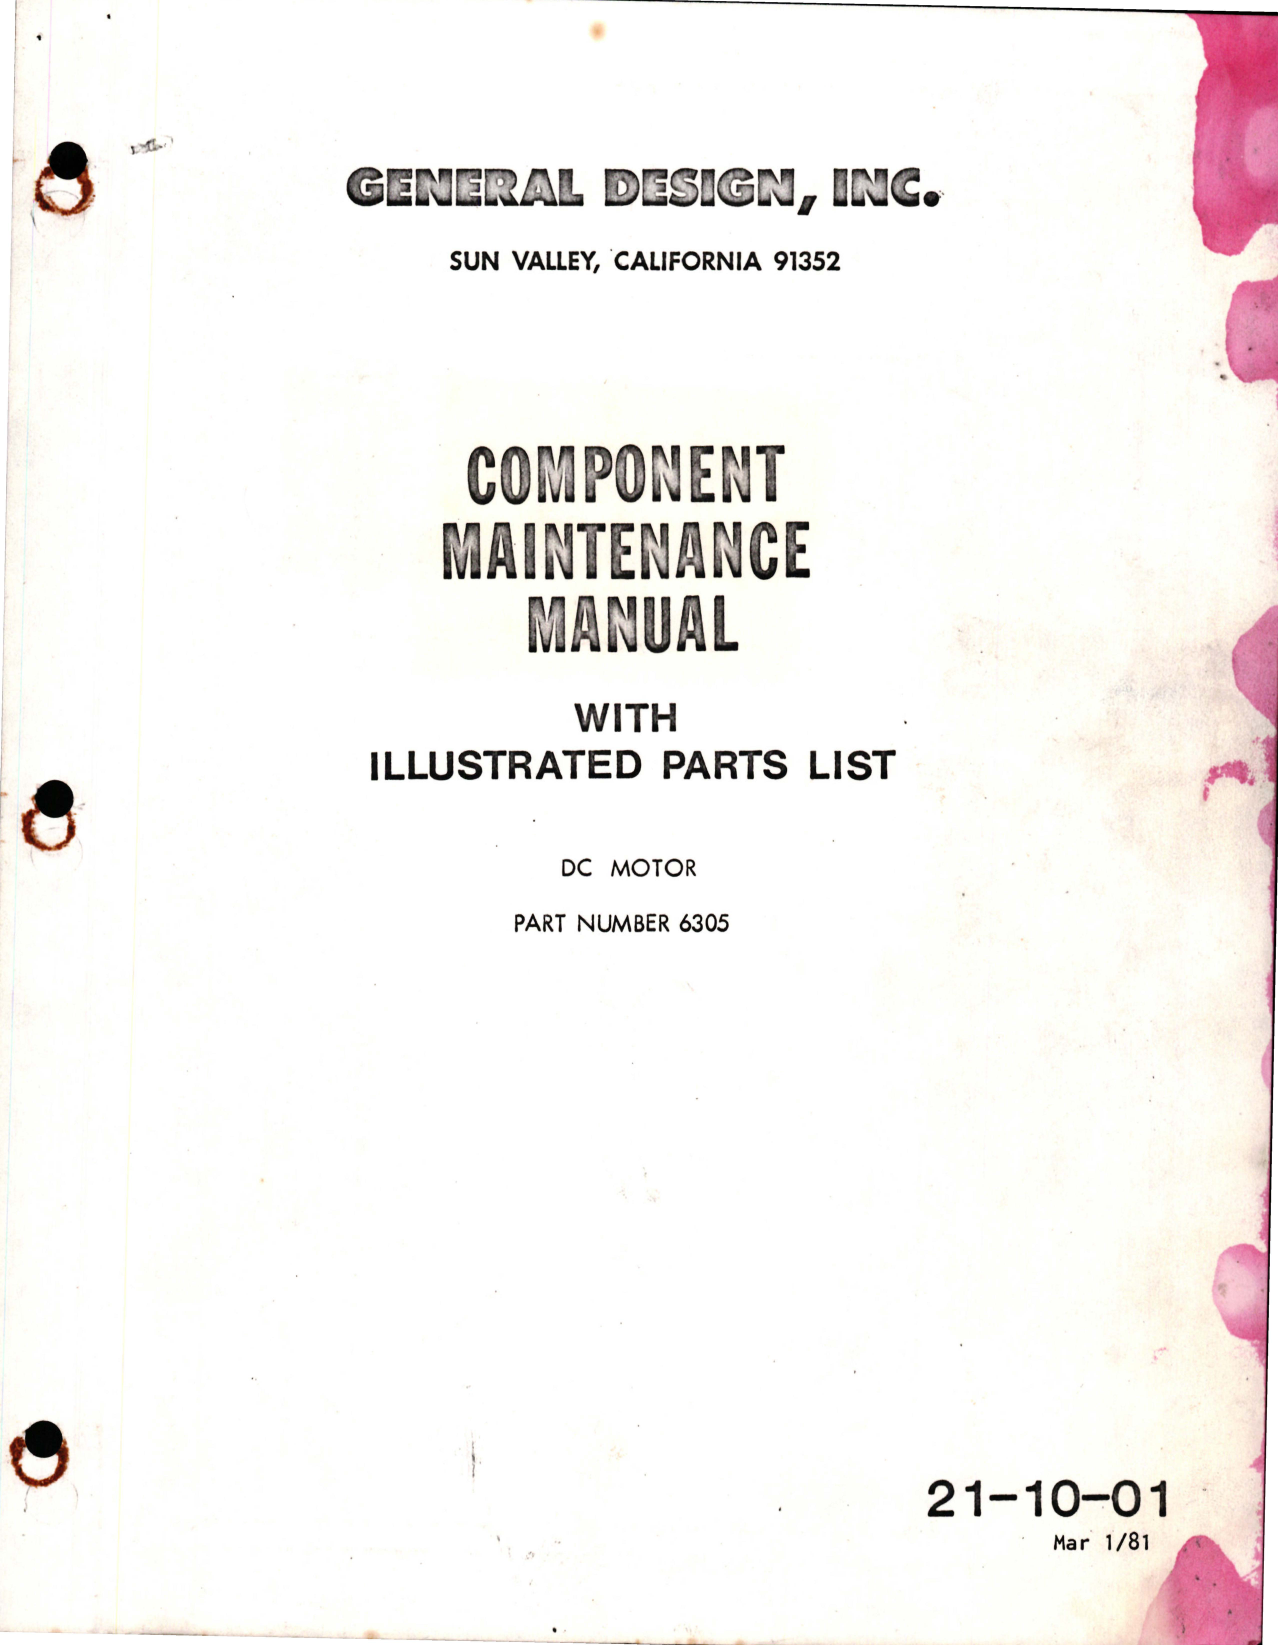 Sample page 1 from AirCorps Library document: Maintenance Manual with Illustrated Parts List for  DC Motor - Part 6305